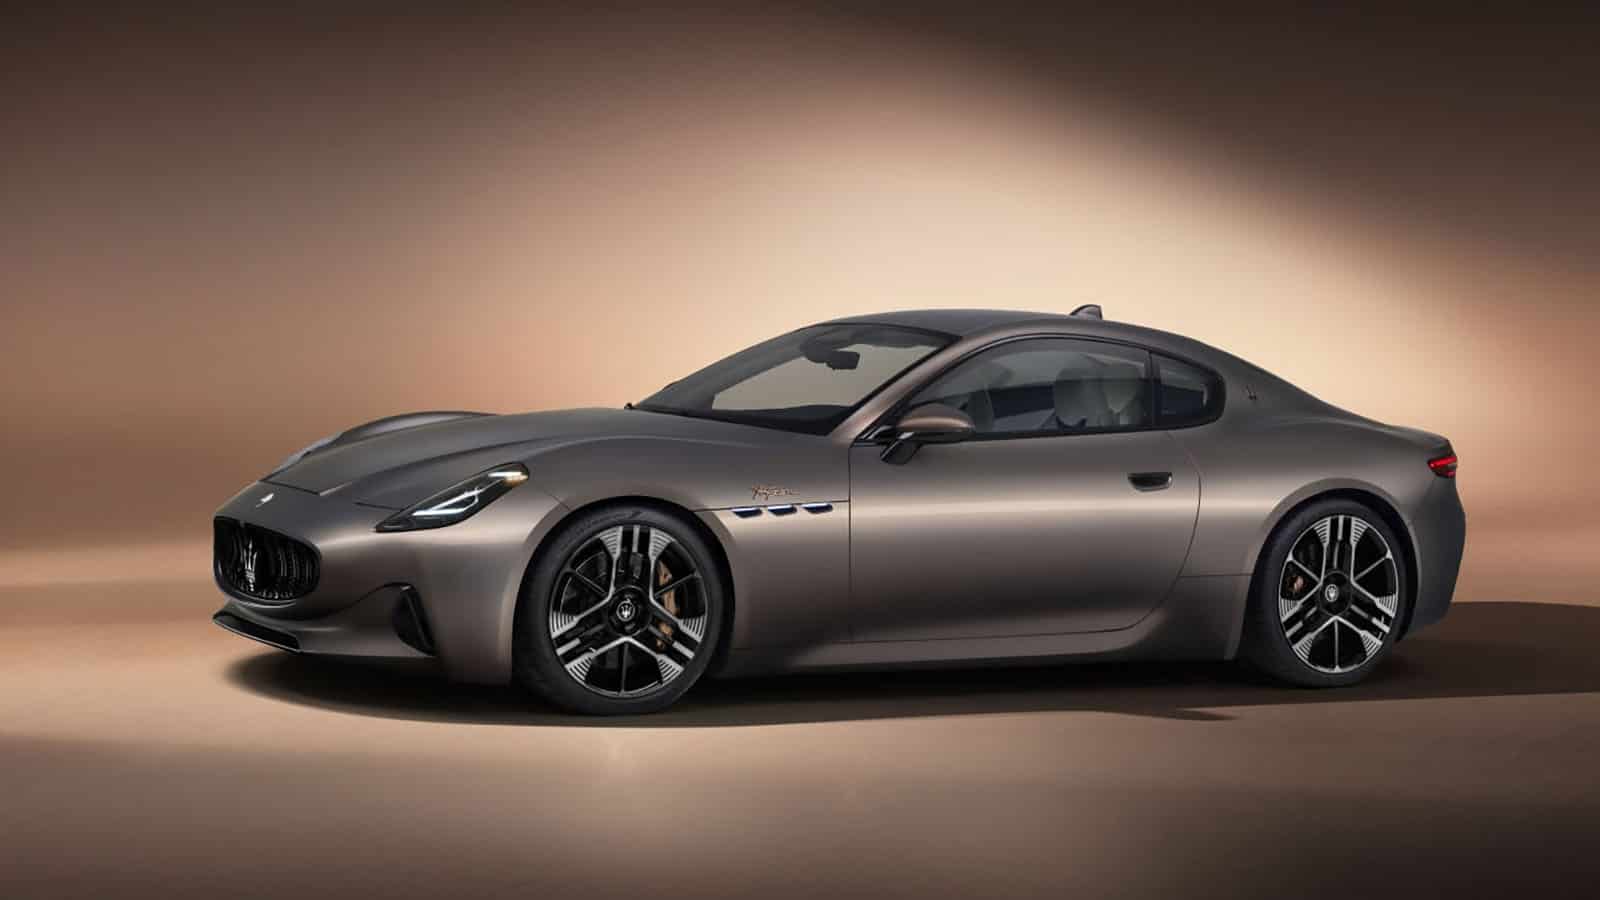 Maserati's first electric GranTurismo is just as sporty as its gas counterpart